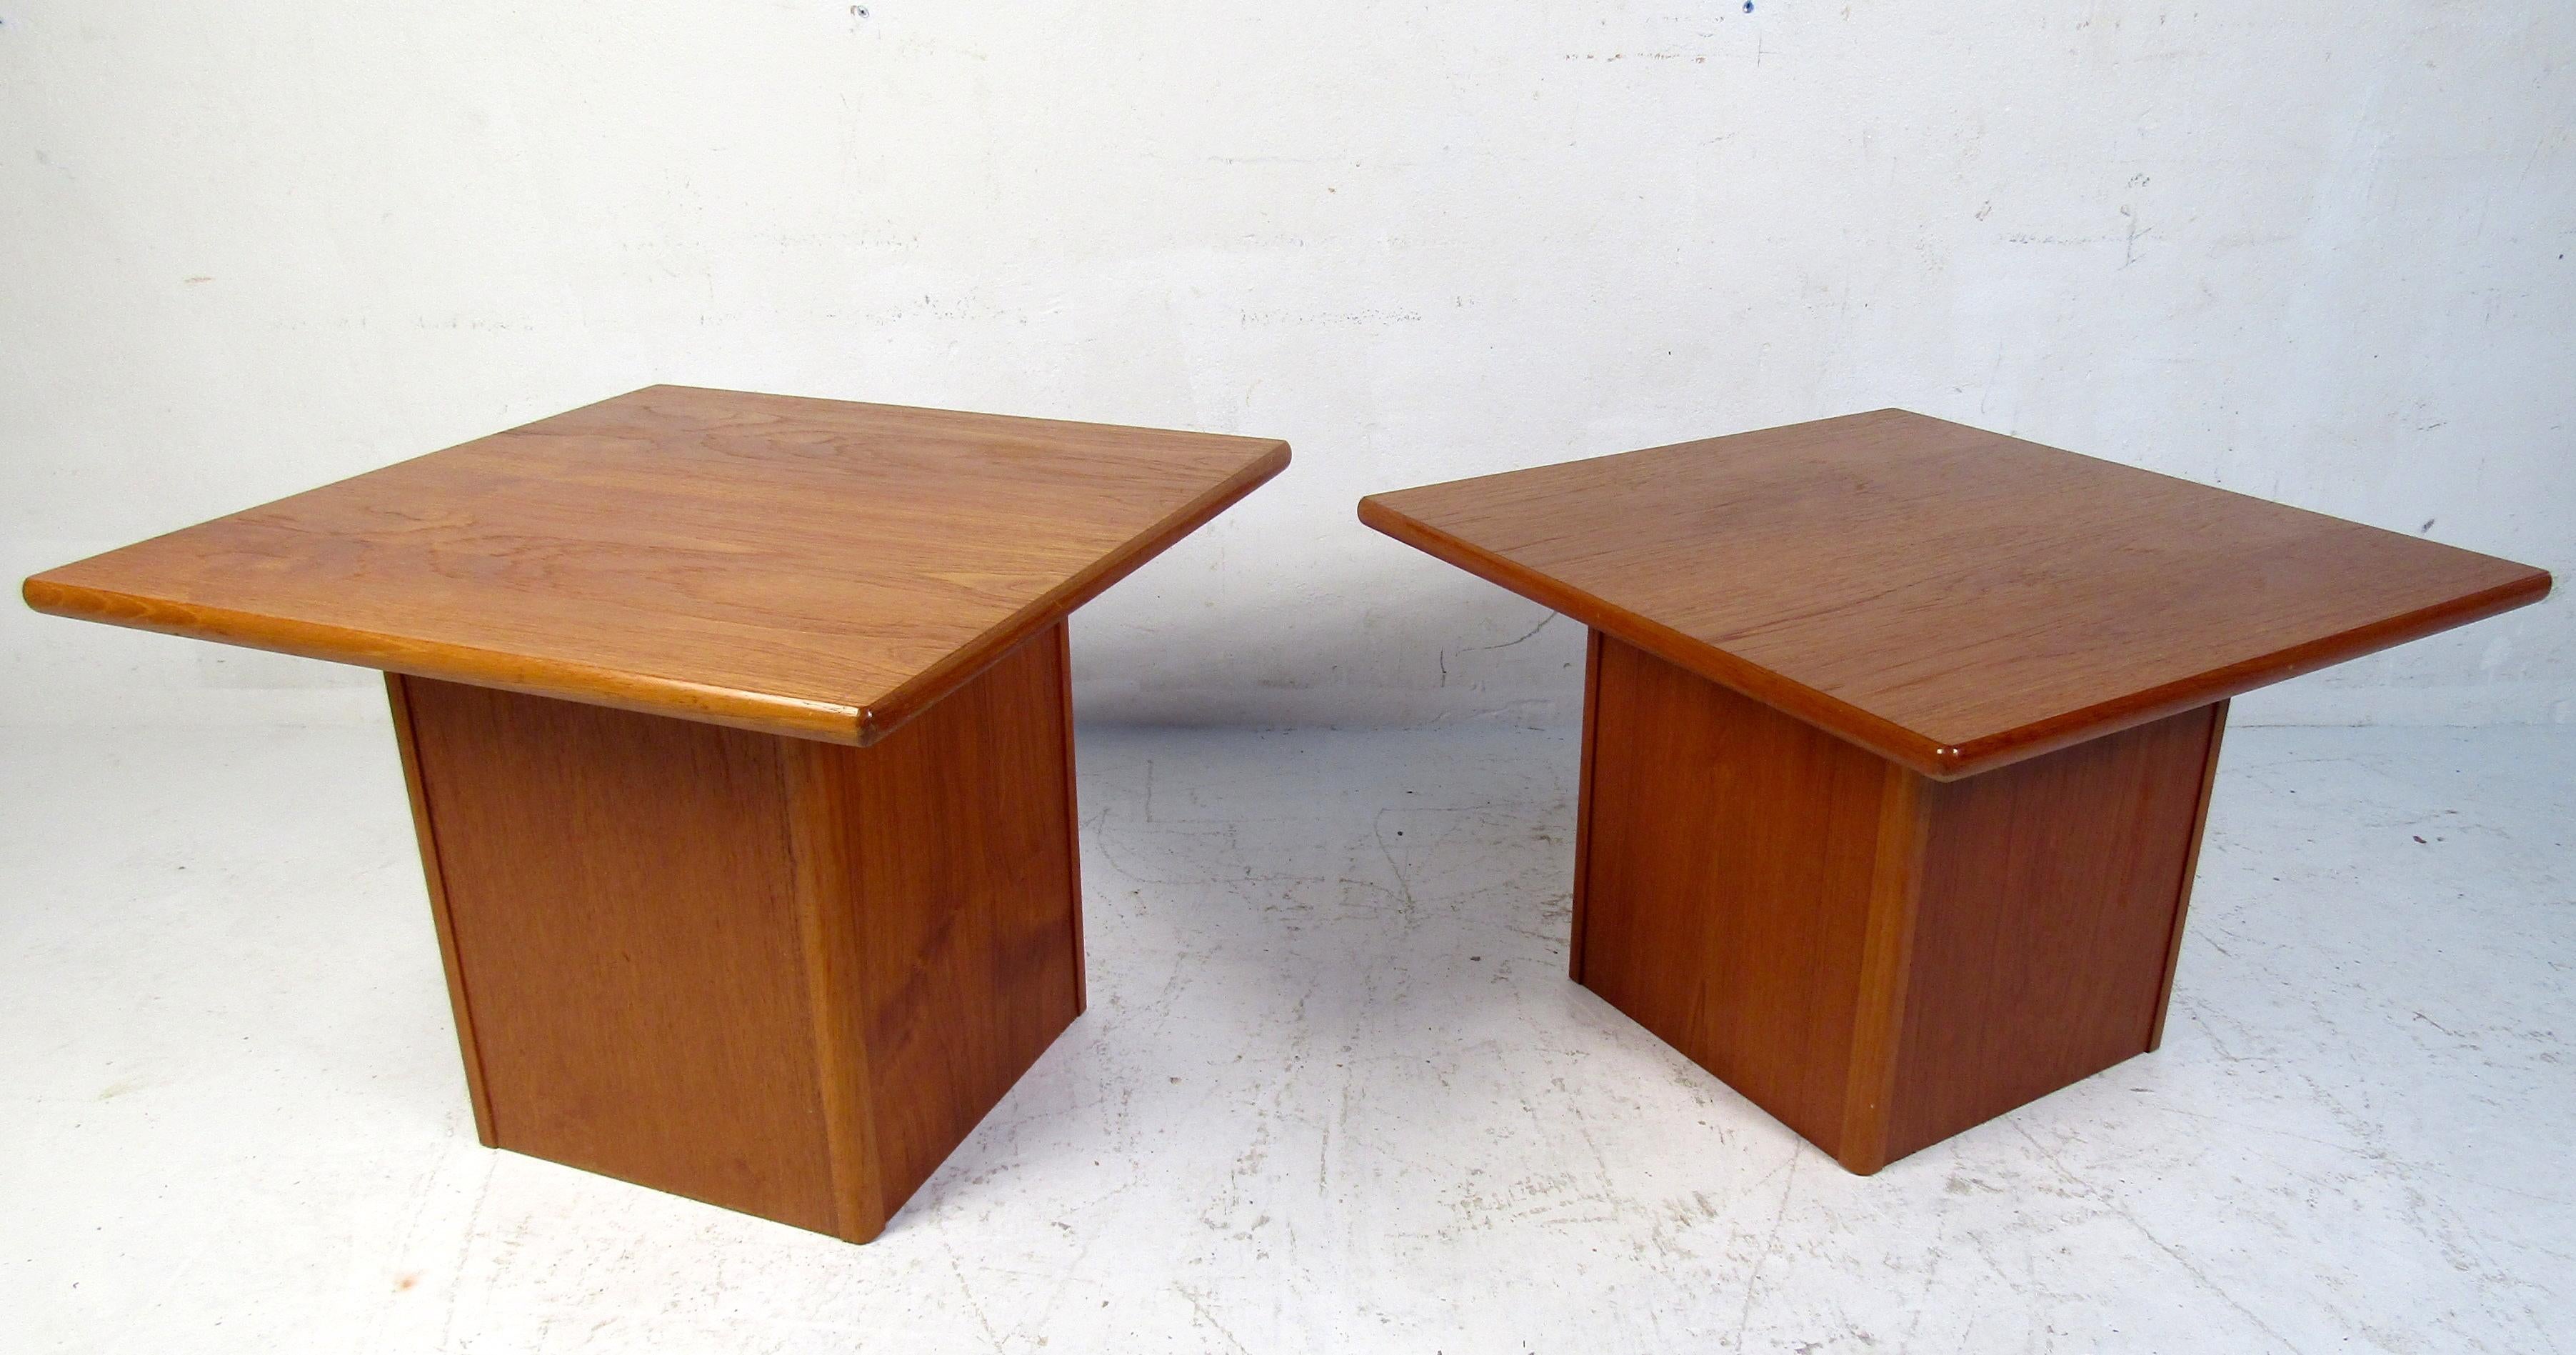 Mid-Century Modern pair of side tables featured in teak, these tables would make a great addition to any home or office.

Please confirm item location (NJ or BK).